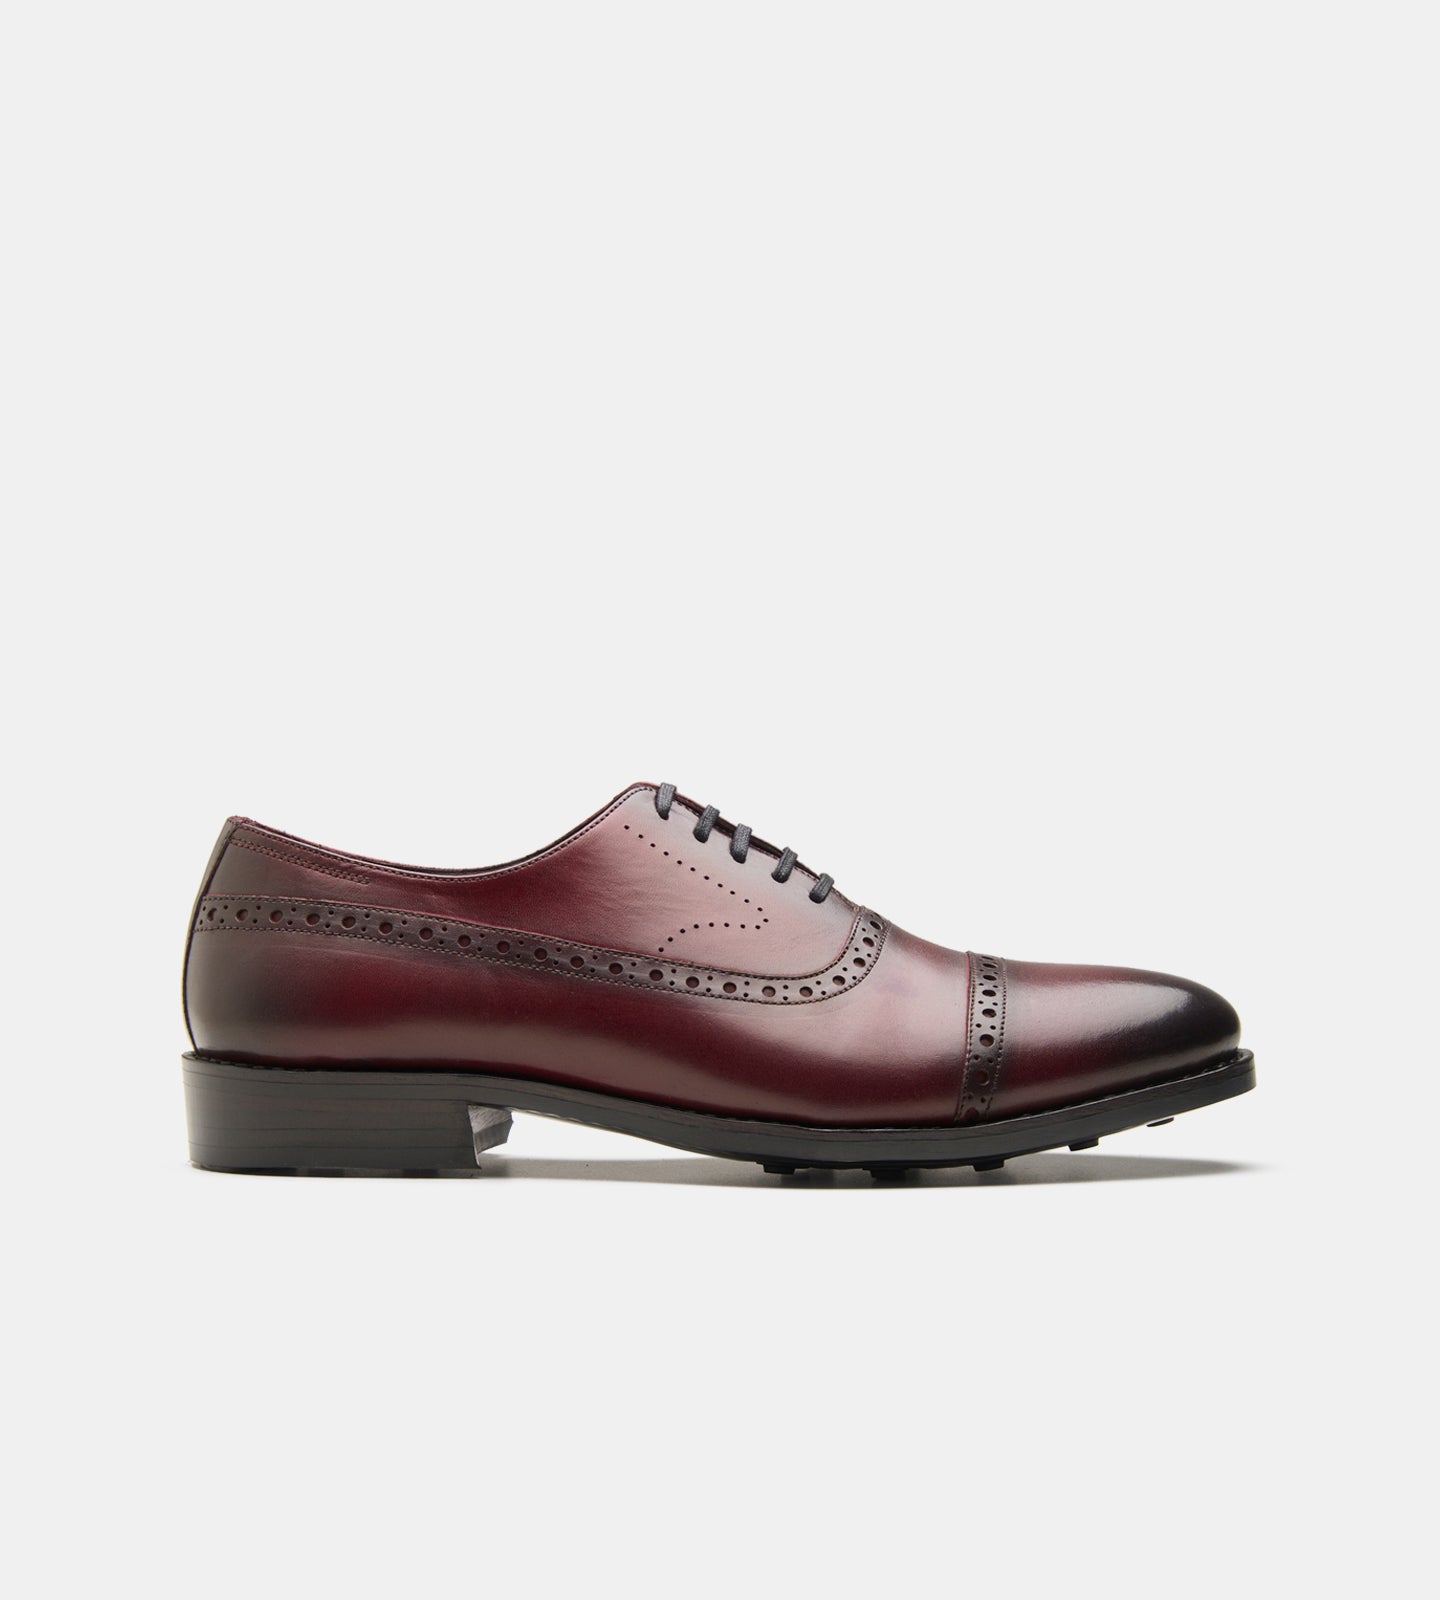 Goodyear Welted Burgundy Adelaide Oxfords